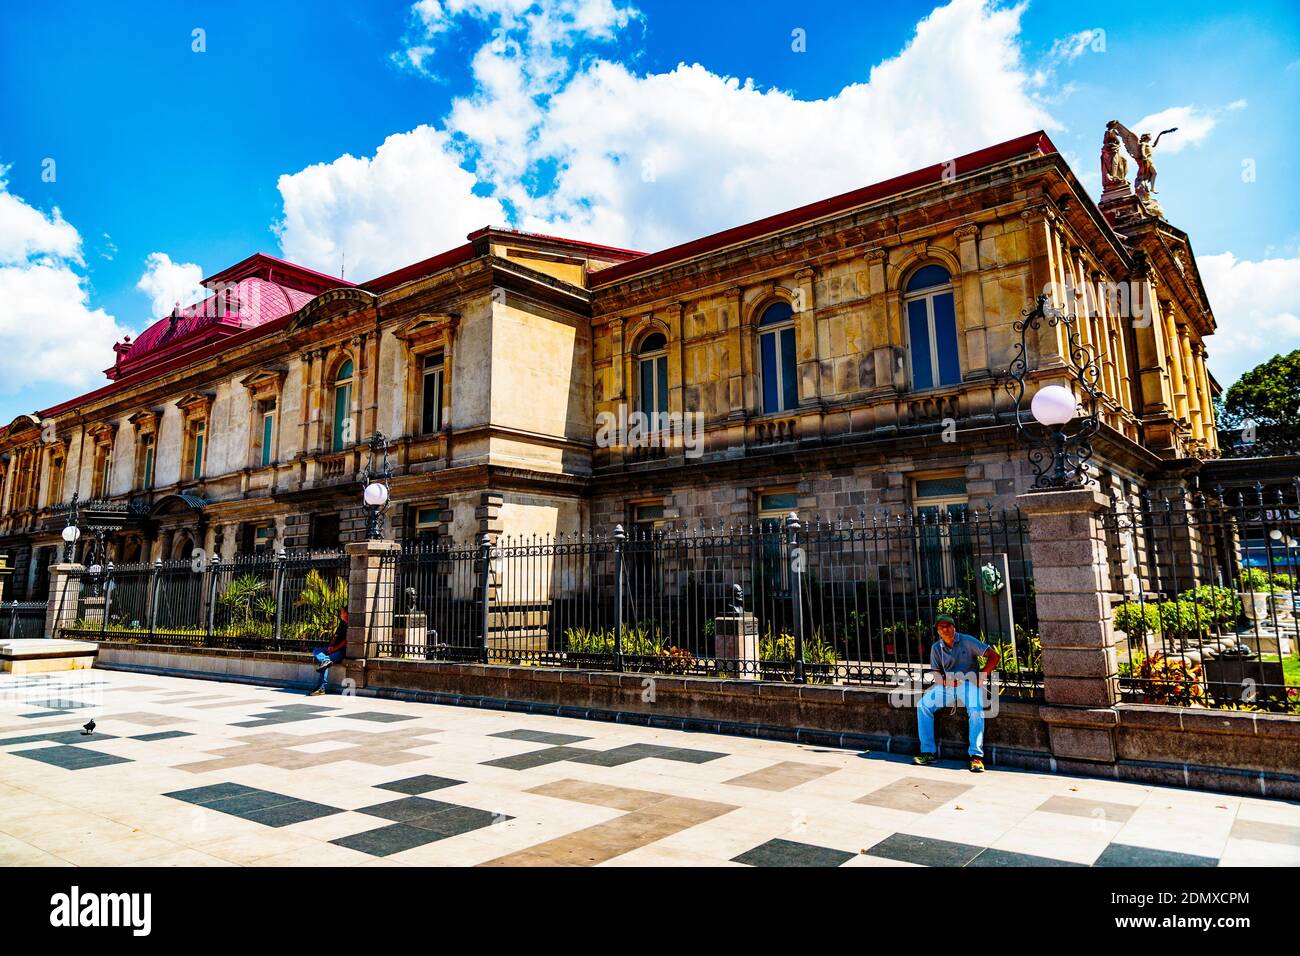 San Jose, Costa Rica - March 31, 2017:  The National Theatre of Costa Rica (Teatro Nacional de Costa Rica) is located in the central section of San Jo Stock Photo